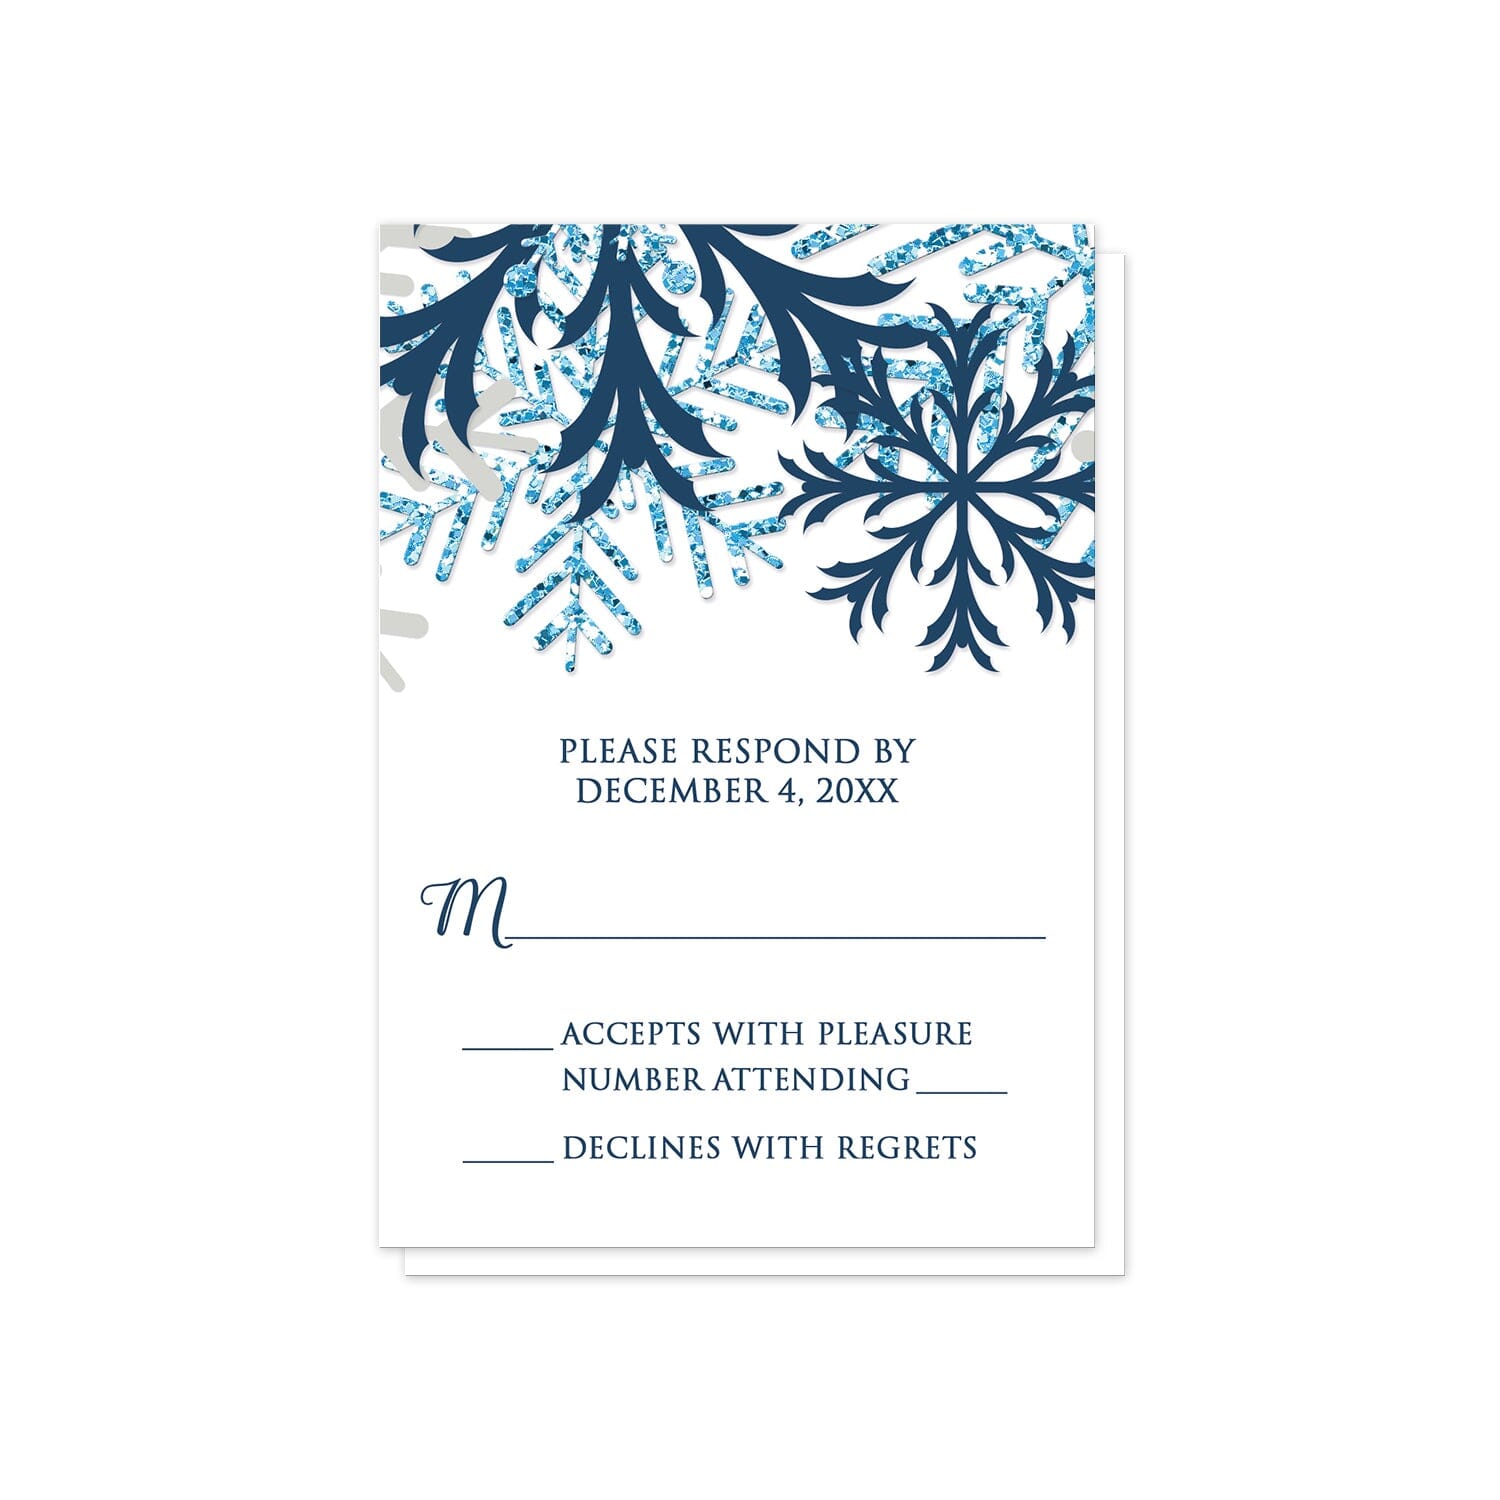 Rustic Snowflake Denim Winter RSVP Cards at Artistically Invited.